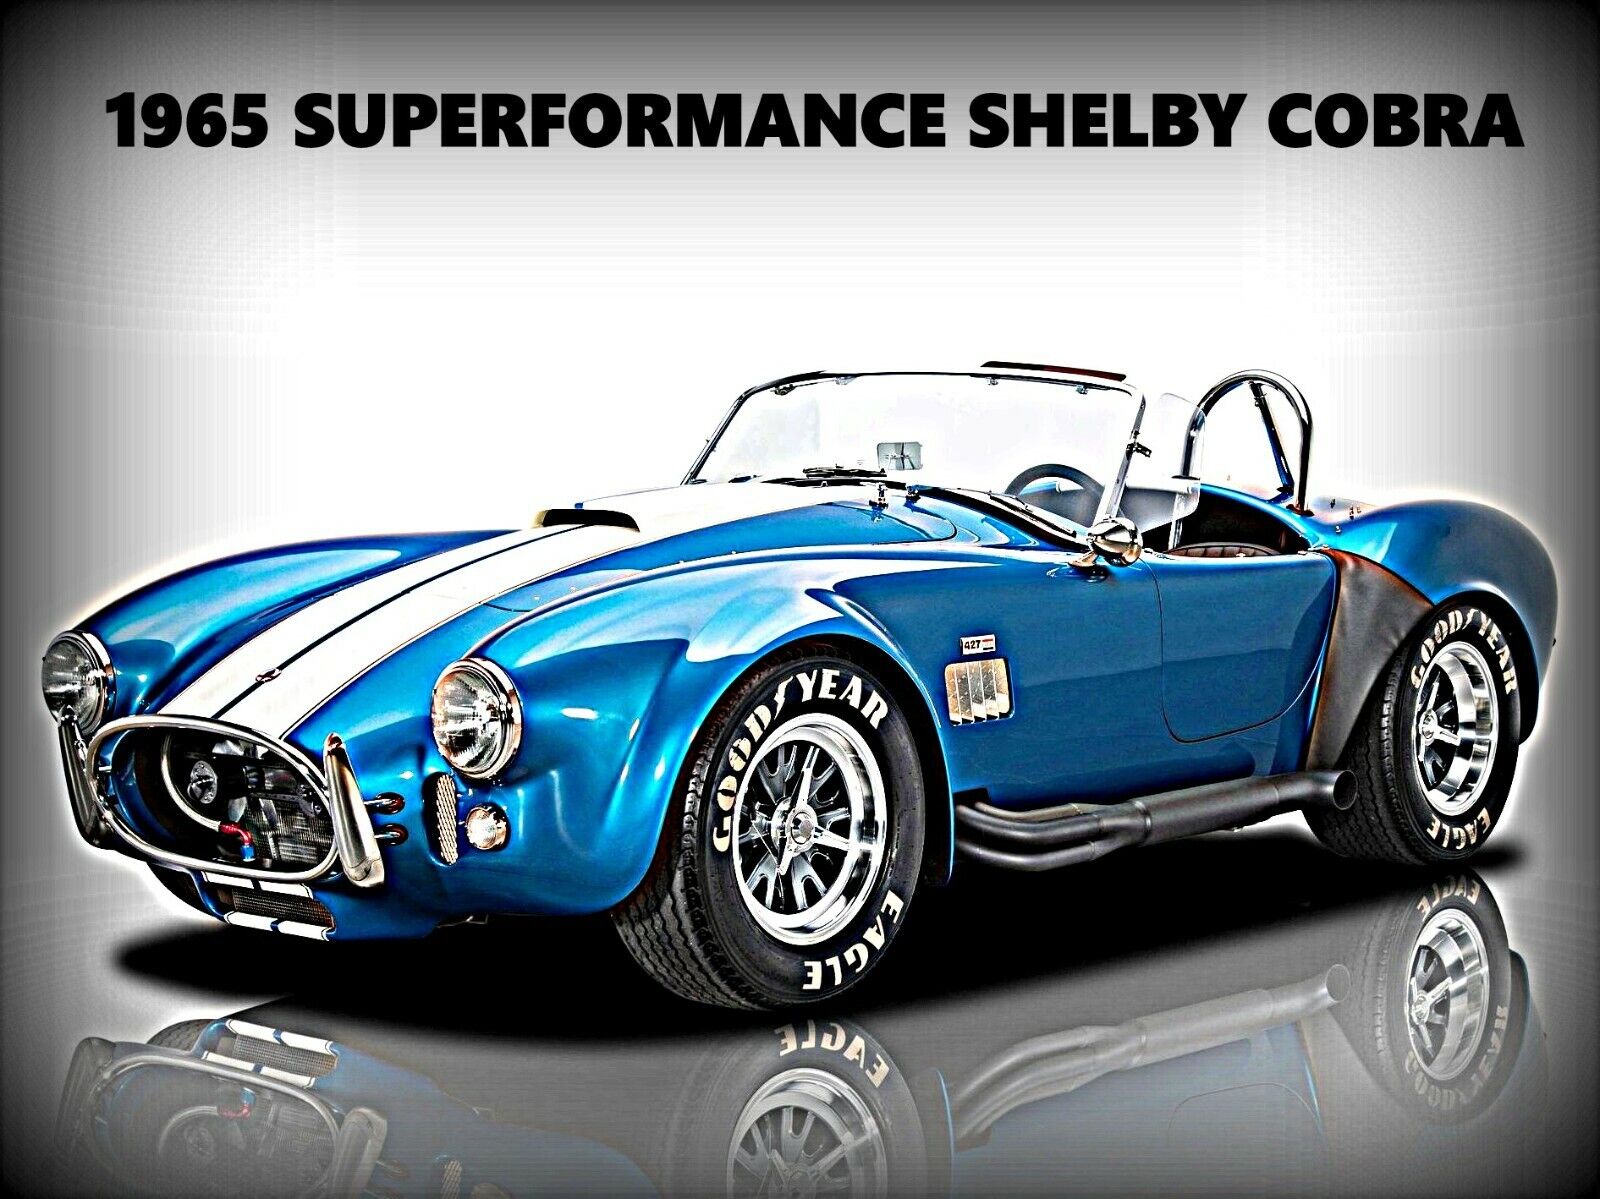 1965 Superformance Shelby Cobra  New Metal Sign: Blue w/ White Racing Stripe